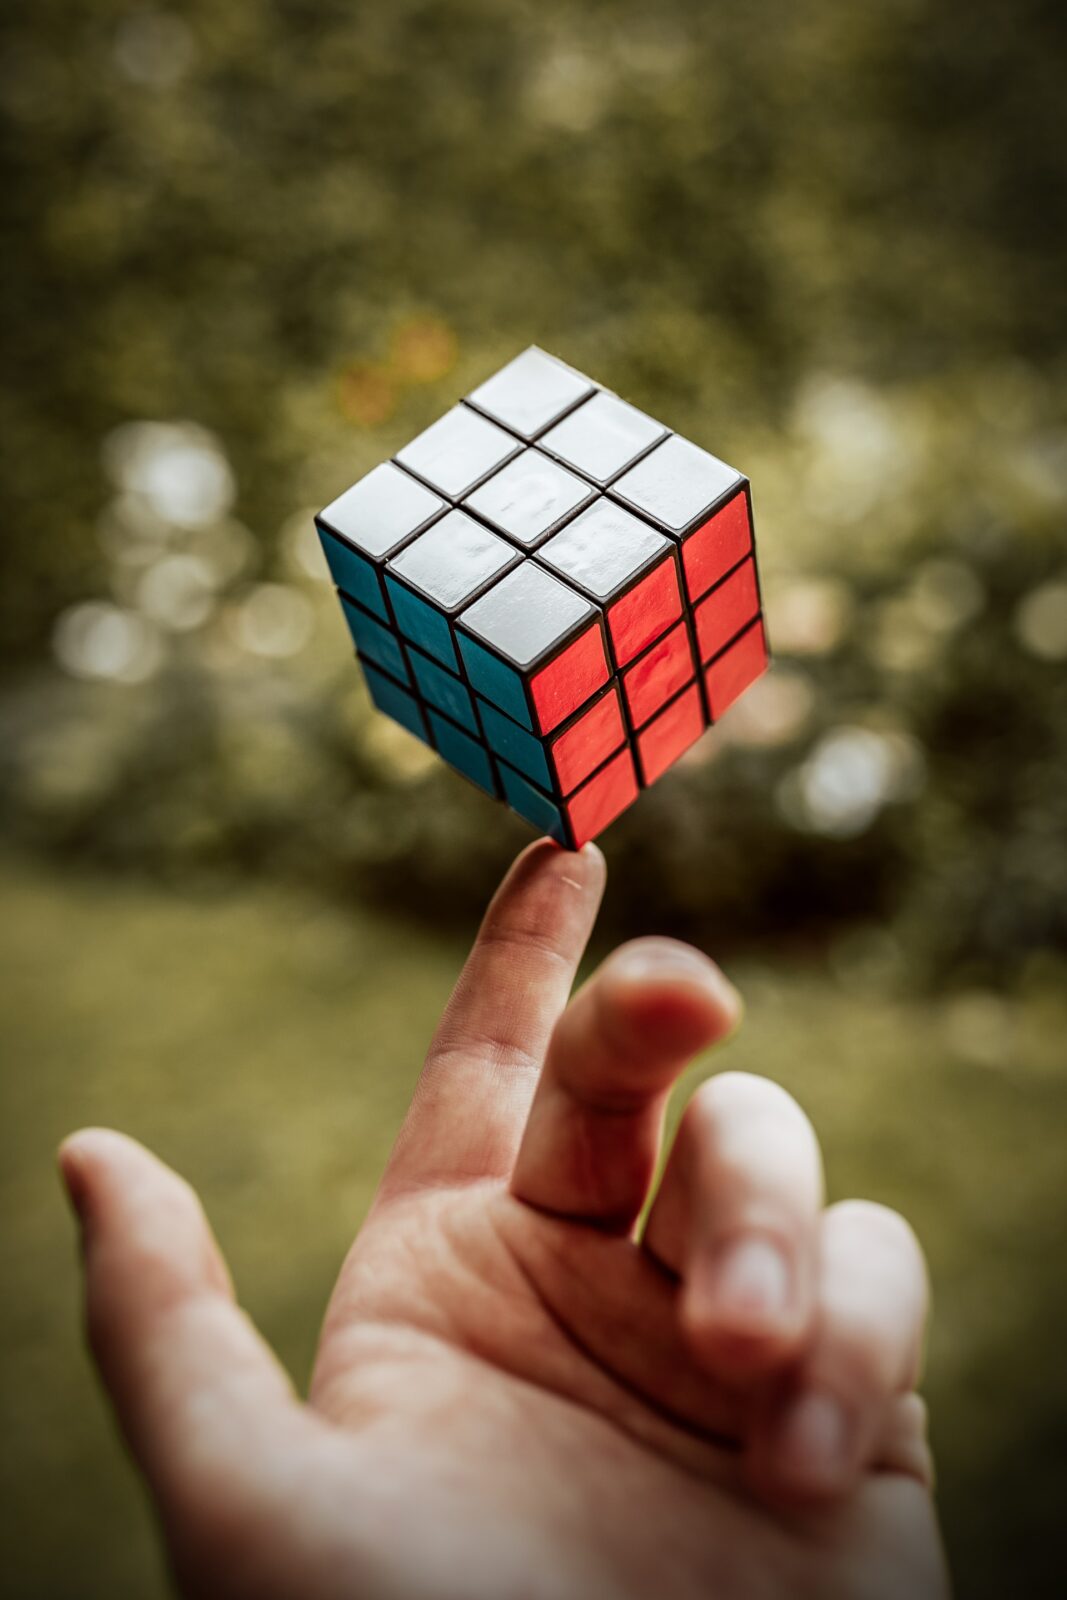 image of a rubik's cube balanced on a finger